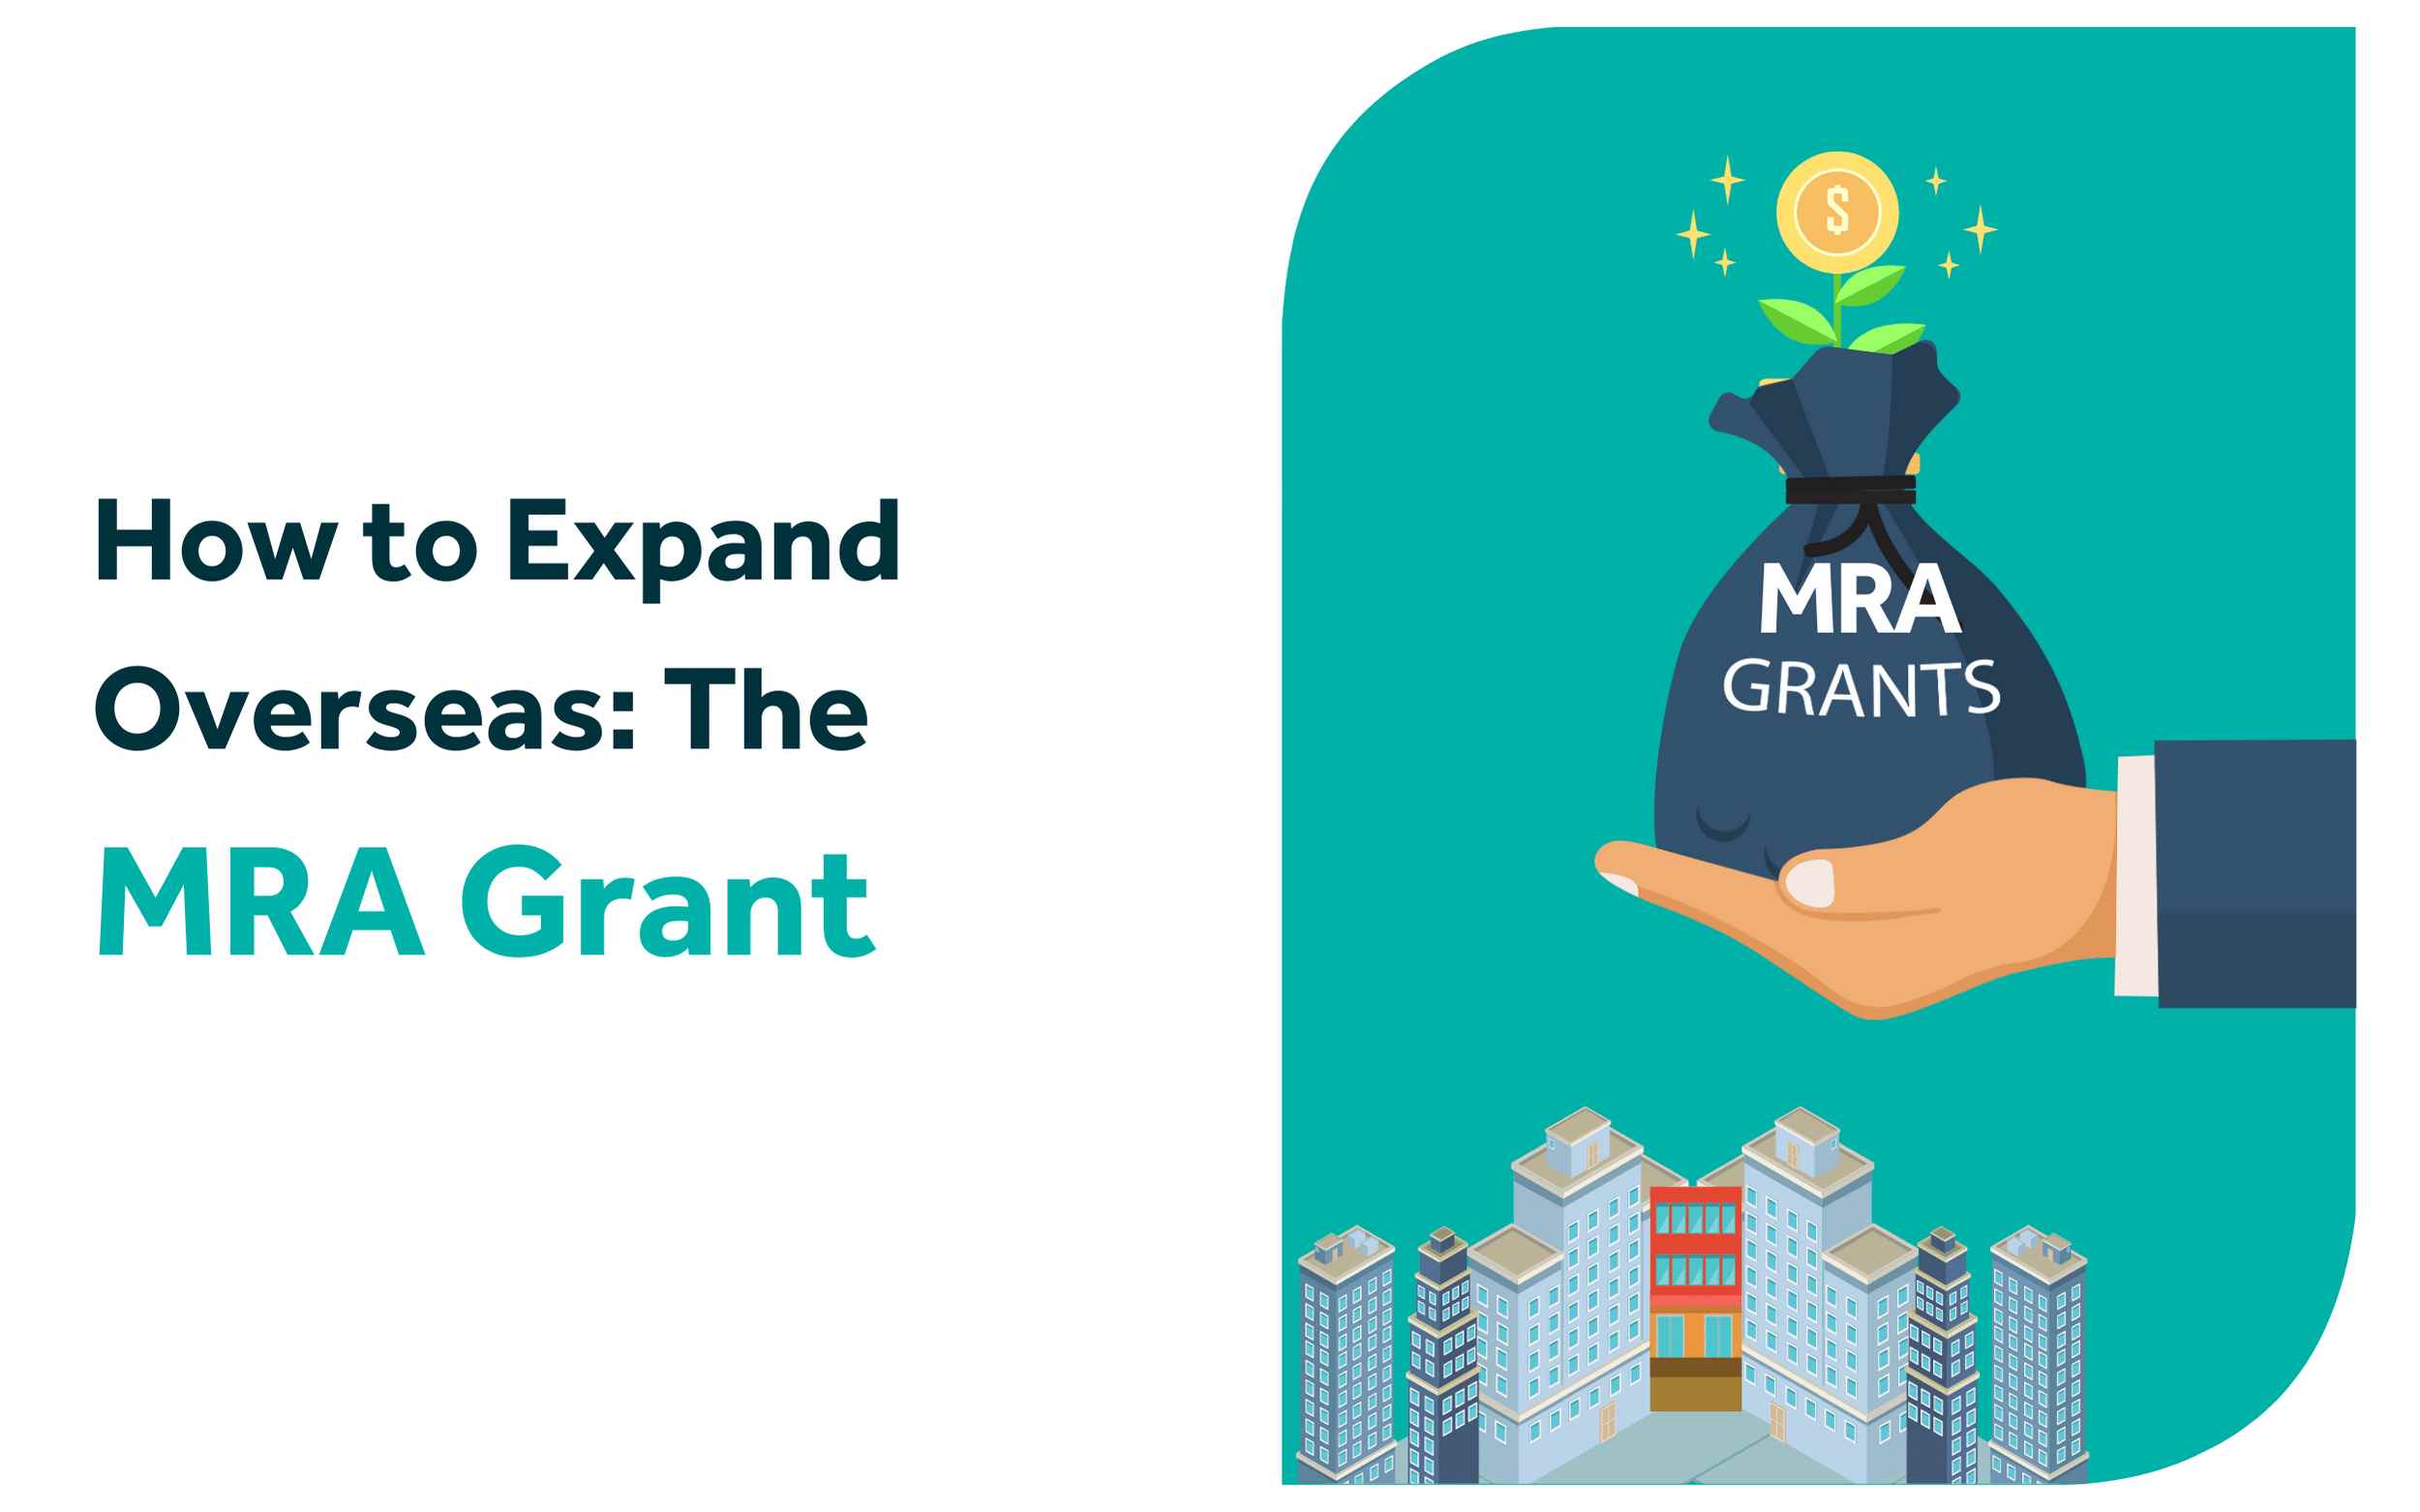 How to Expand Overseas: The MRA Grant